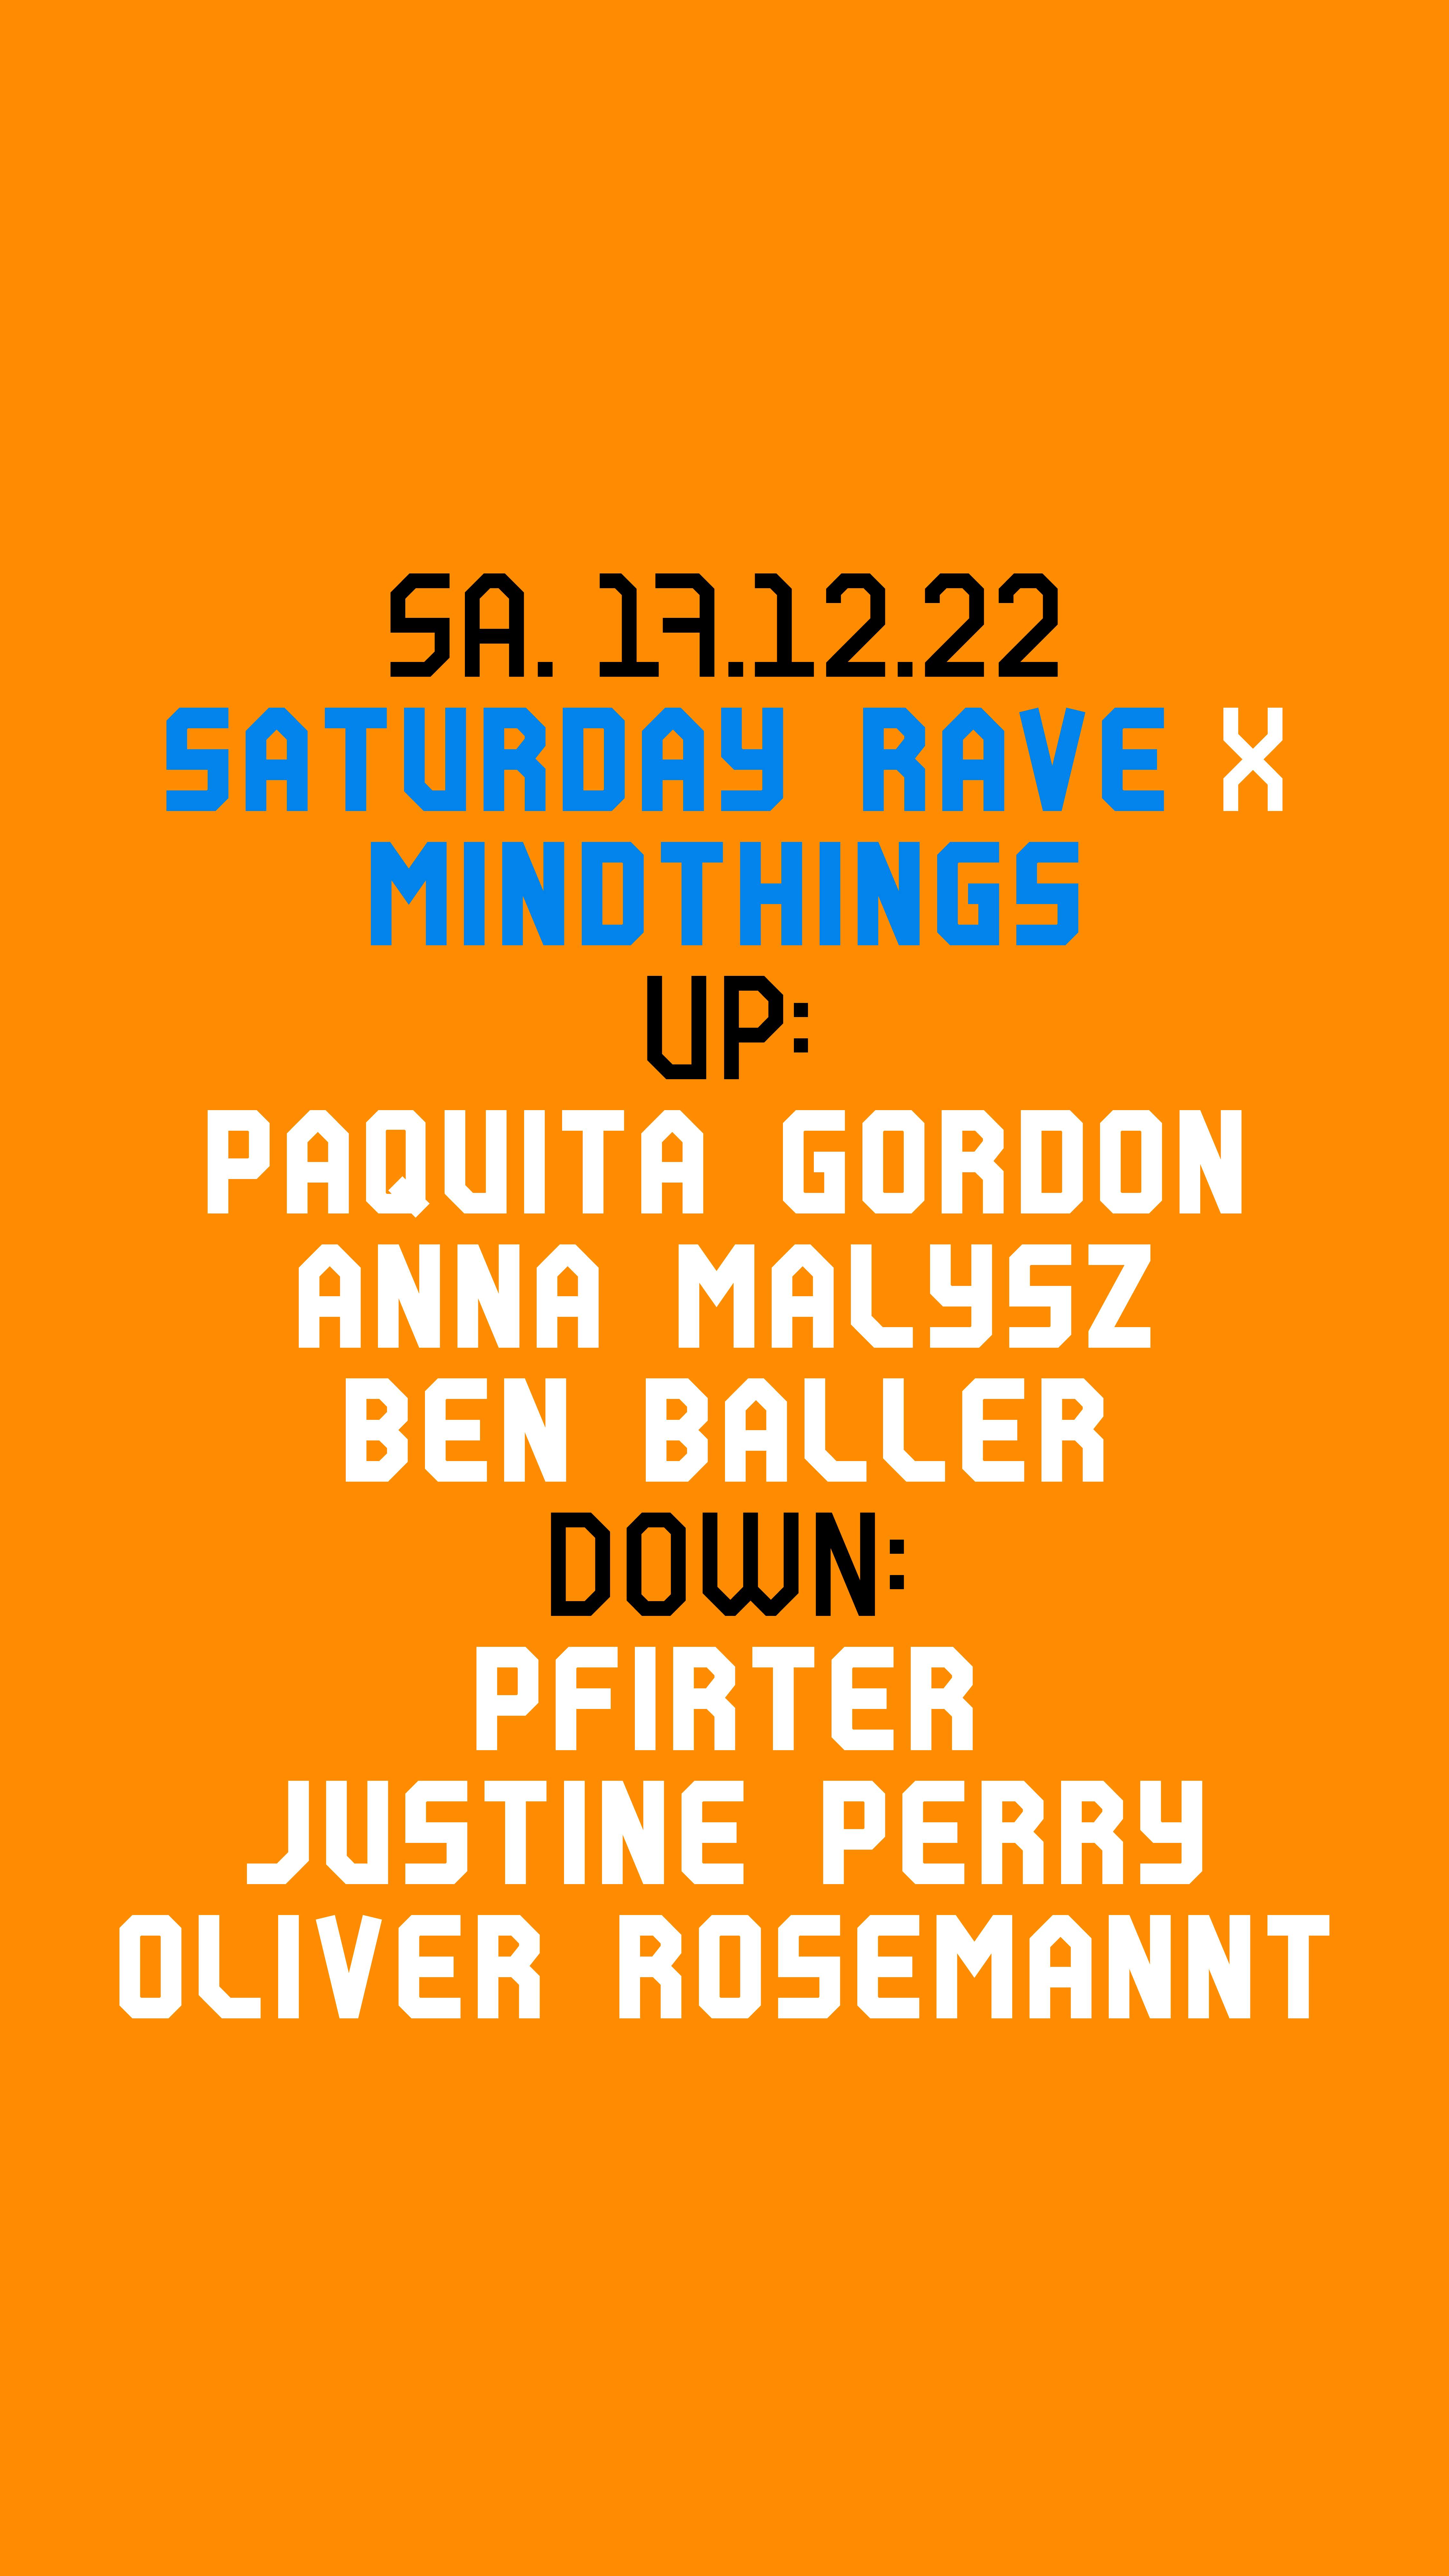 SATURDAY RAVE X MINDTHINGS with Paquita Gordon, Pfirter, Justine Perry - フライヤー裏